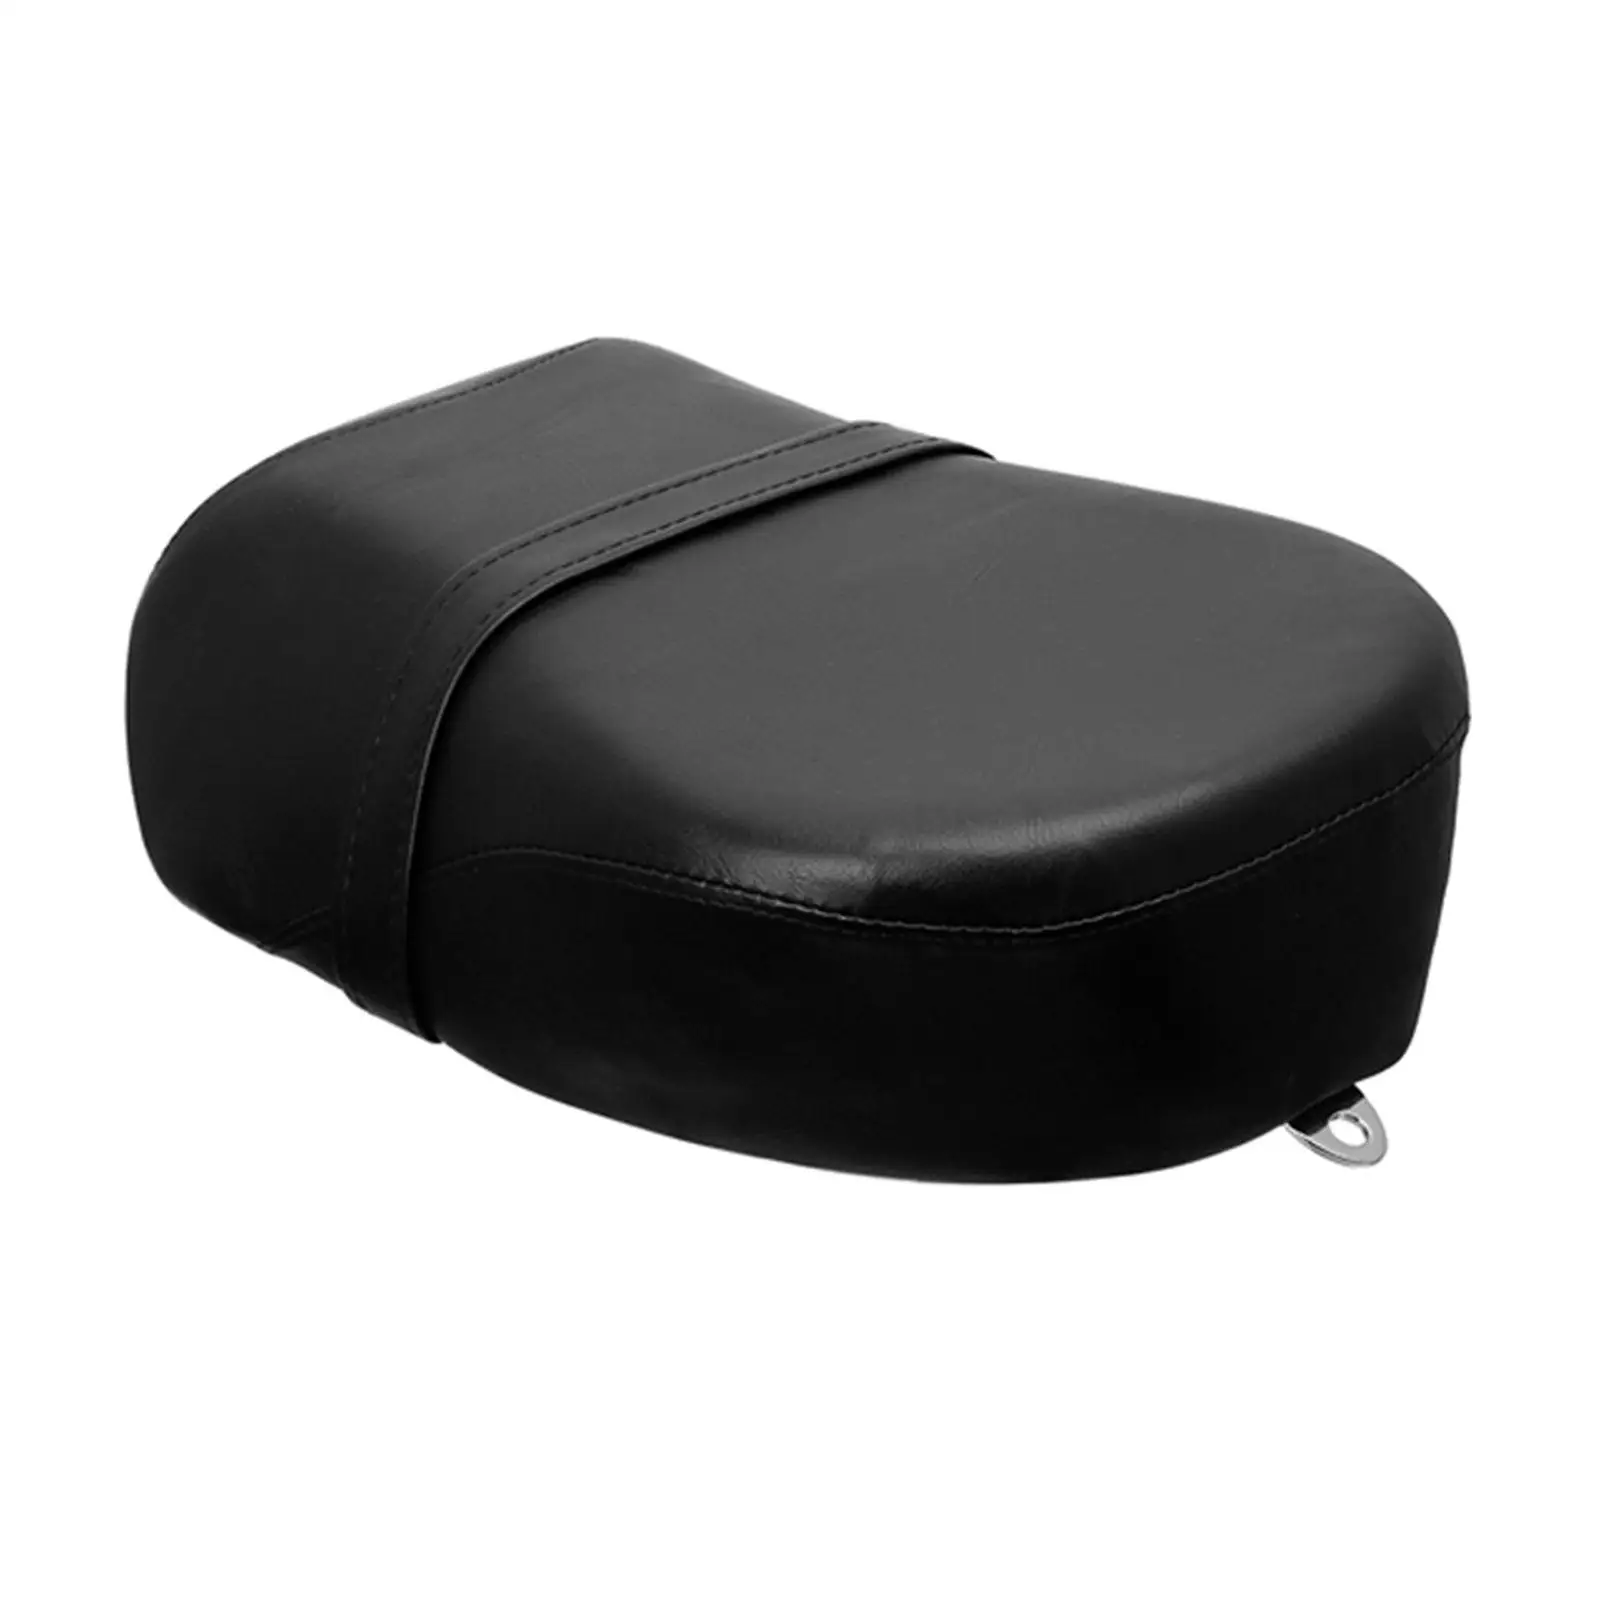 Motorcycle Rear Passenger Seat Cushion for Harley Sportster Durable